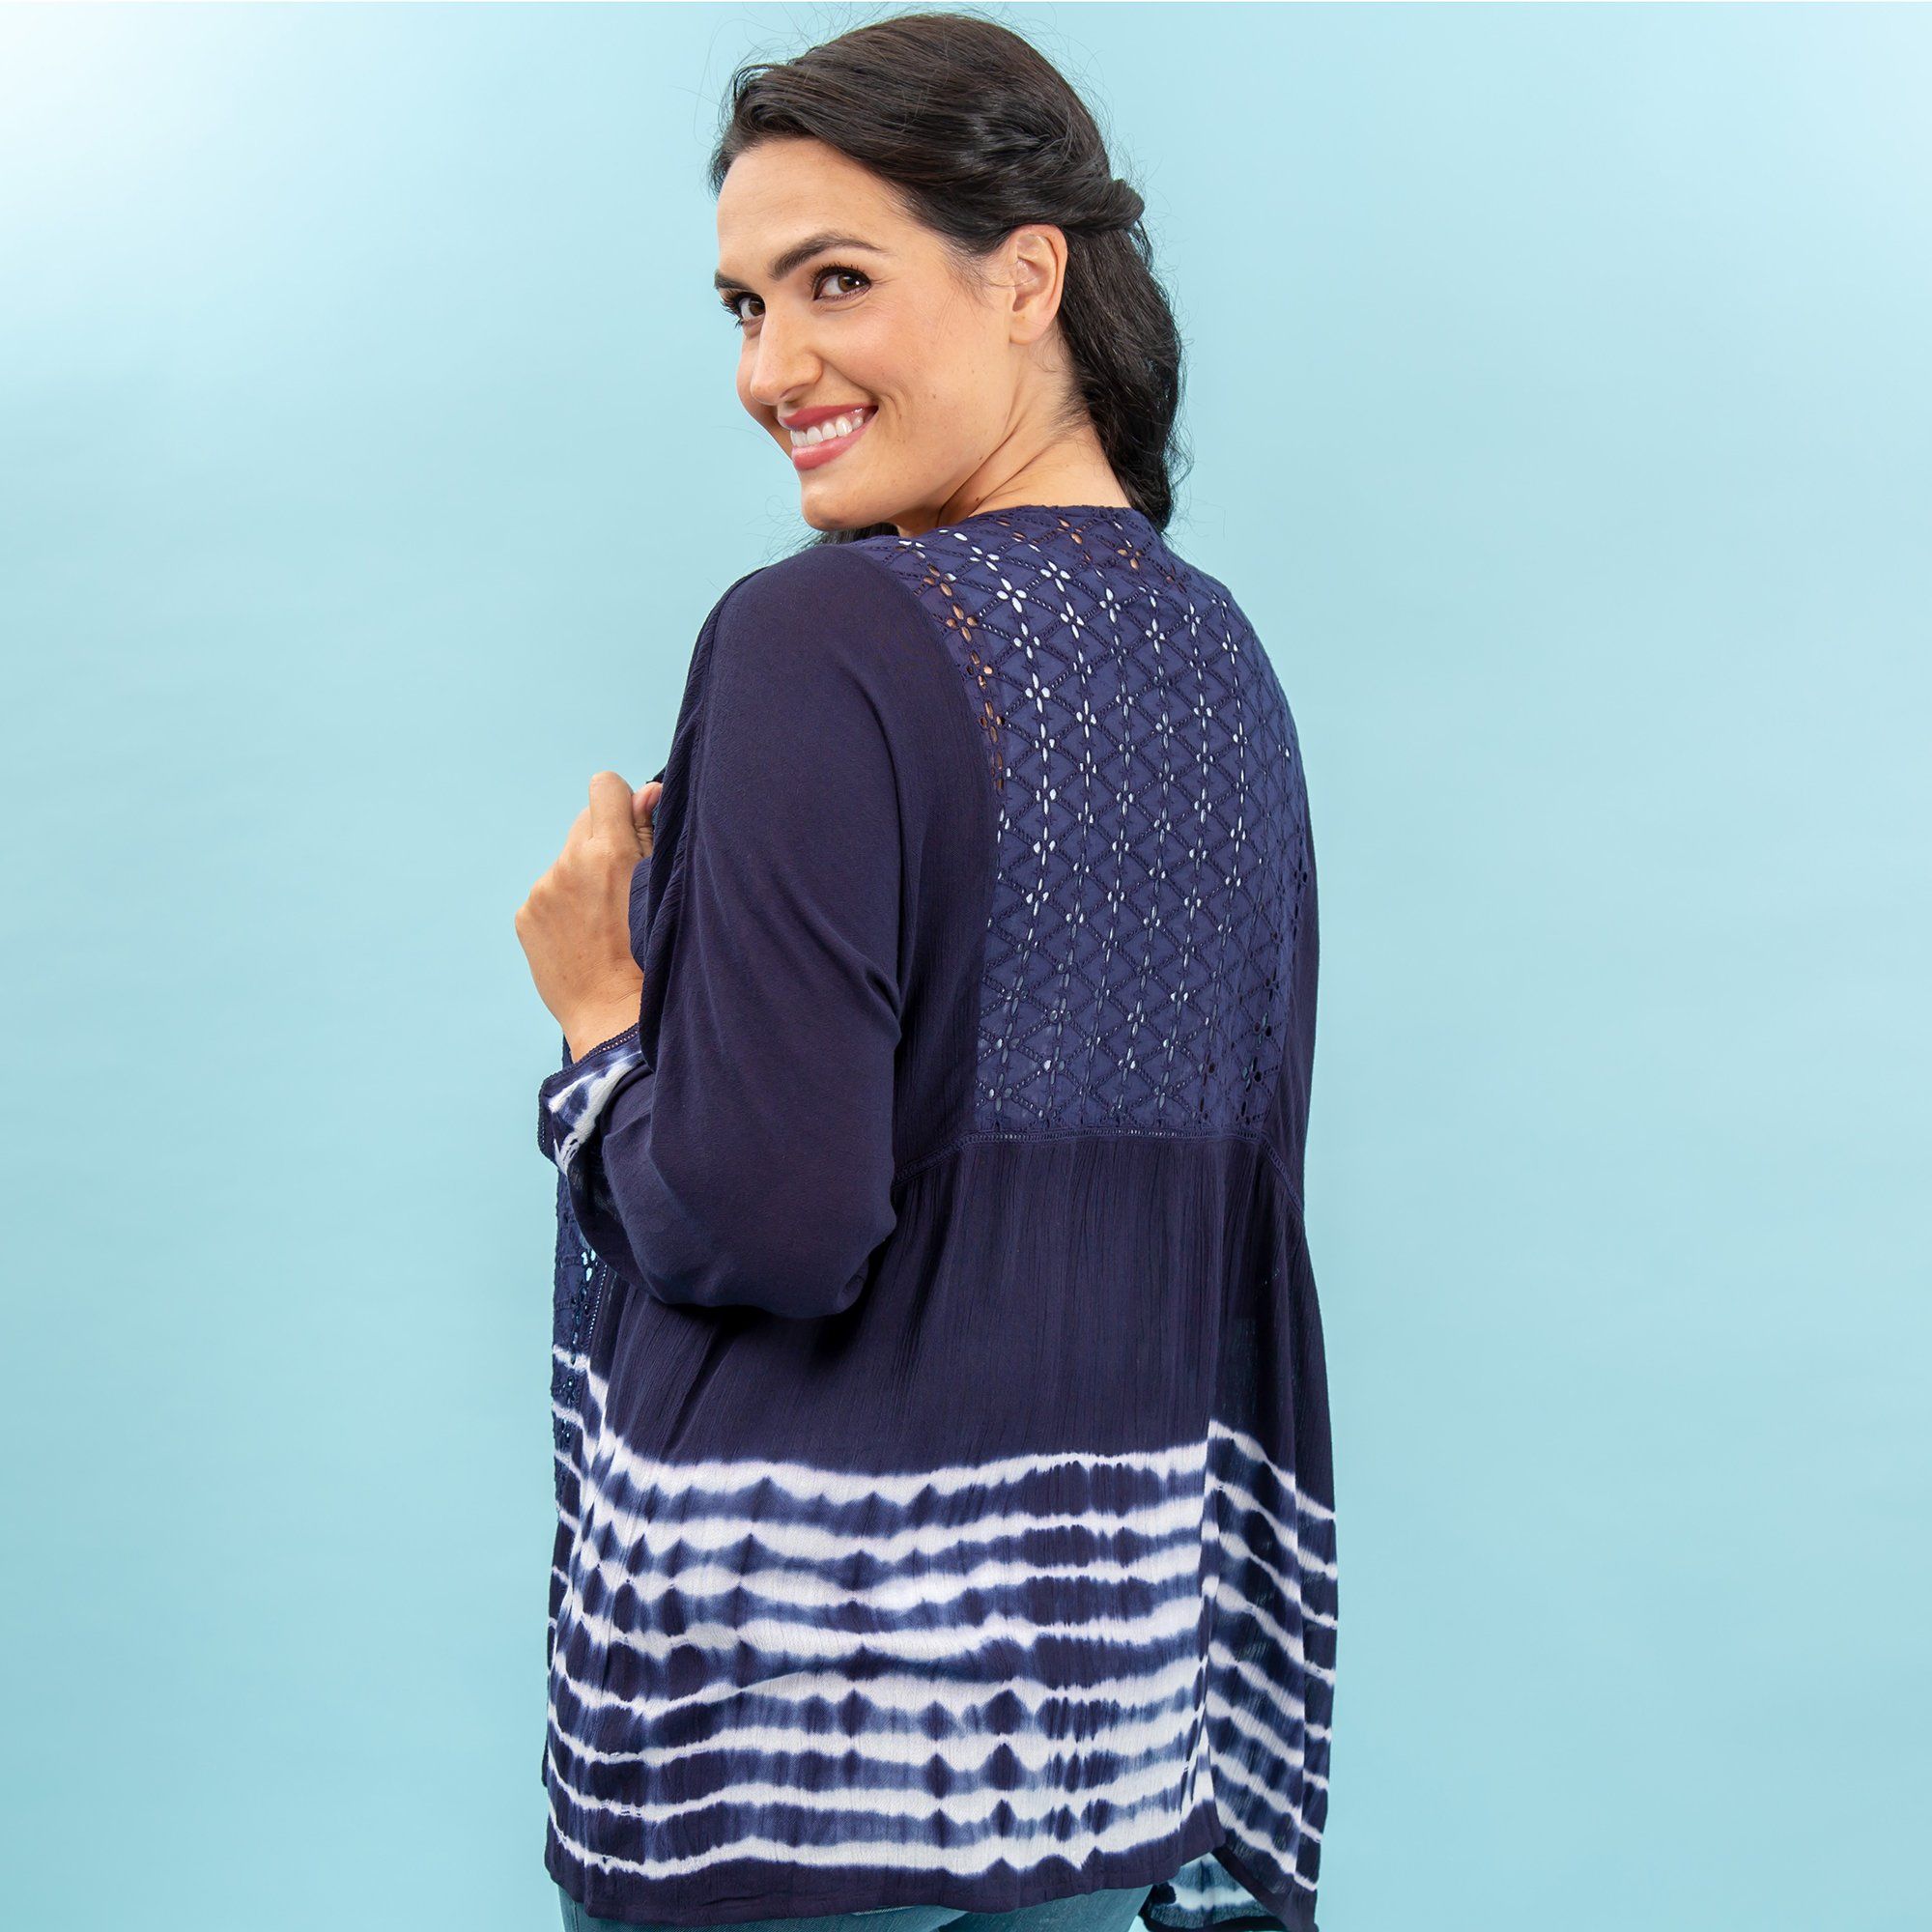 Ripple Effect Lace Topper - S/M